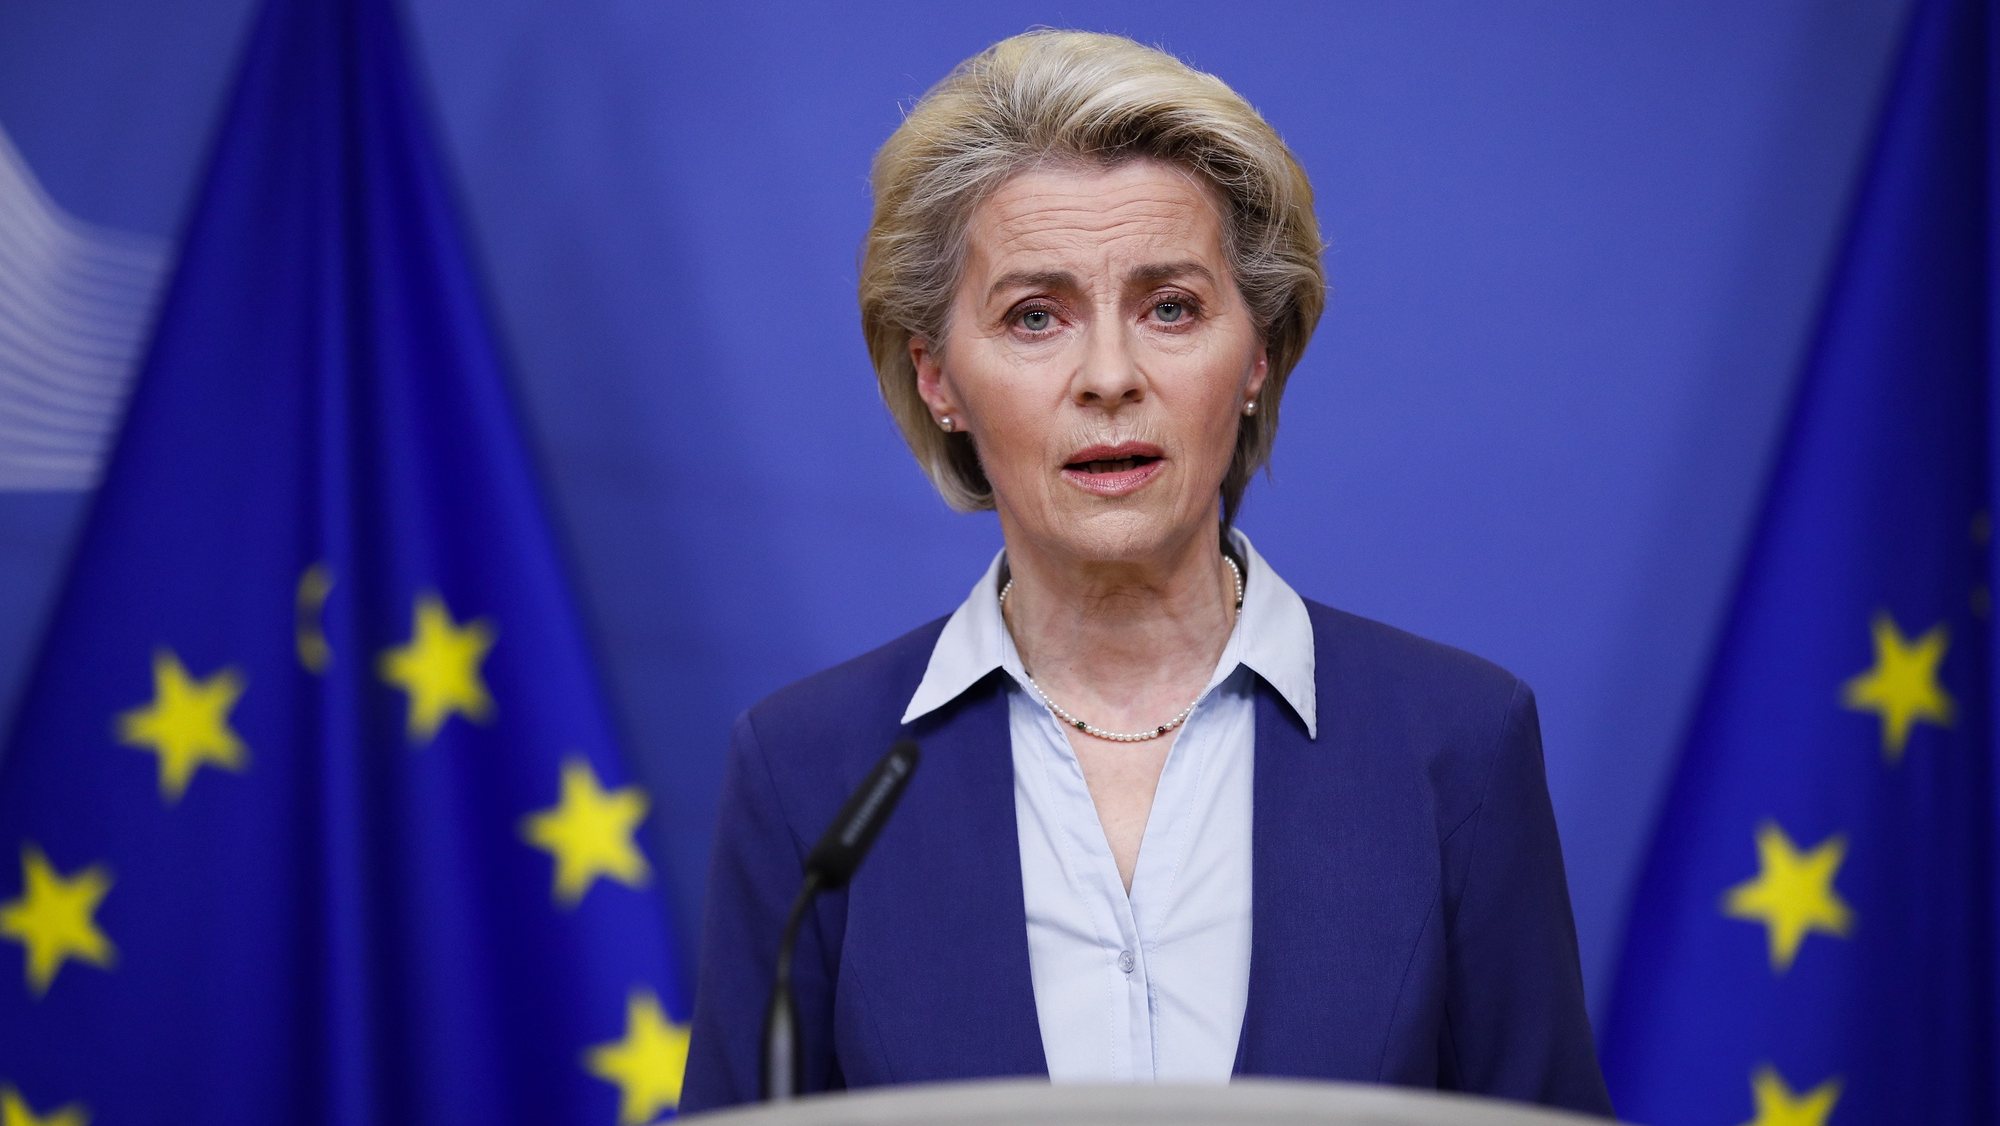 epa09777251 European Commission President Ursula von der Leyen delivers a statement following the conclusion of an EU Foreign Ministers&#039; meeting on the crisis in Ukraine, in Brussels, Belgium 22 February 2022. Von der Leyen said she &quot;welcomed the EU countries&#039; agreement on new sanctions against Russia&quot;. Russia on 21 February 2022 recognised the eastern Ukrainian self-proclaimed breakaway regions as independent states and ordered the deployment of peacekeeping troops to the Donbas, triggering an expected series of economic sanctions announcements by Western countries. The self-proclaimed Donetsk People&#039;s Republic (DNR) and Luhansk People&#039;s Republic (LNR) declared independence in 2014 amid an armed conflict in the eastern Ukraine.  EPA/JOHANNA GERON / POOL